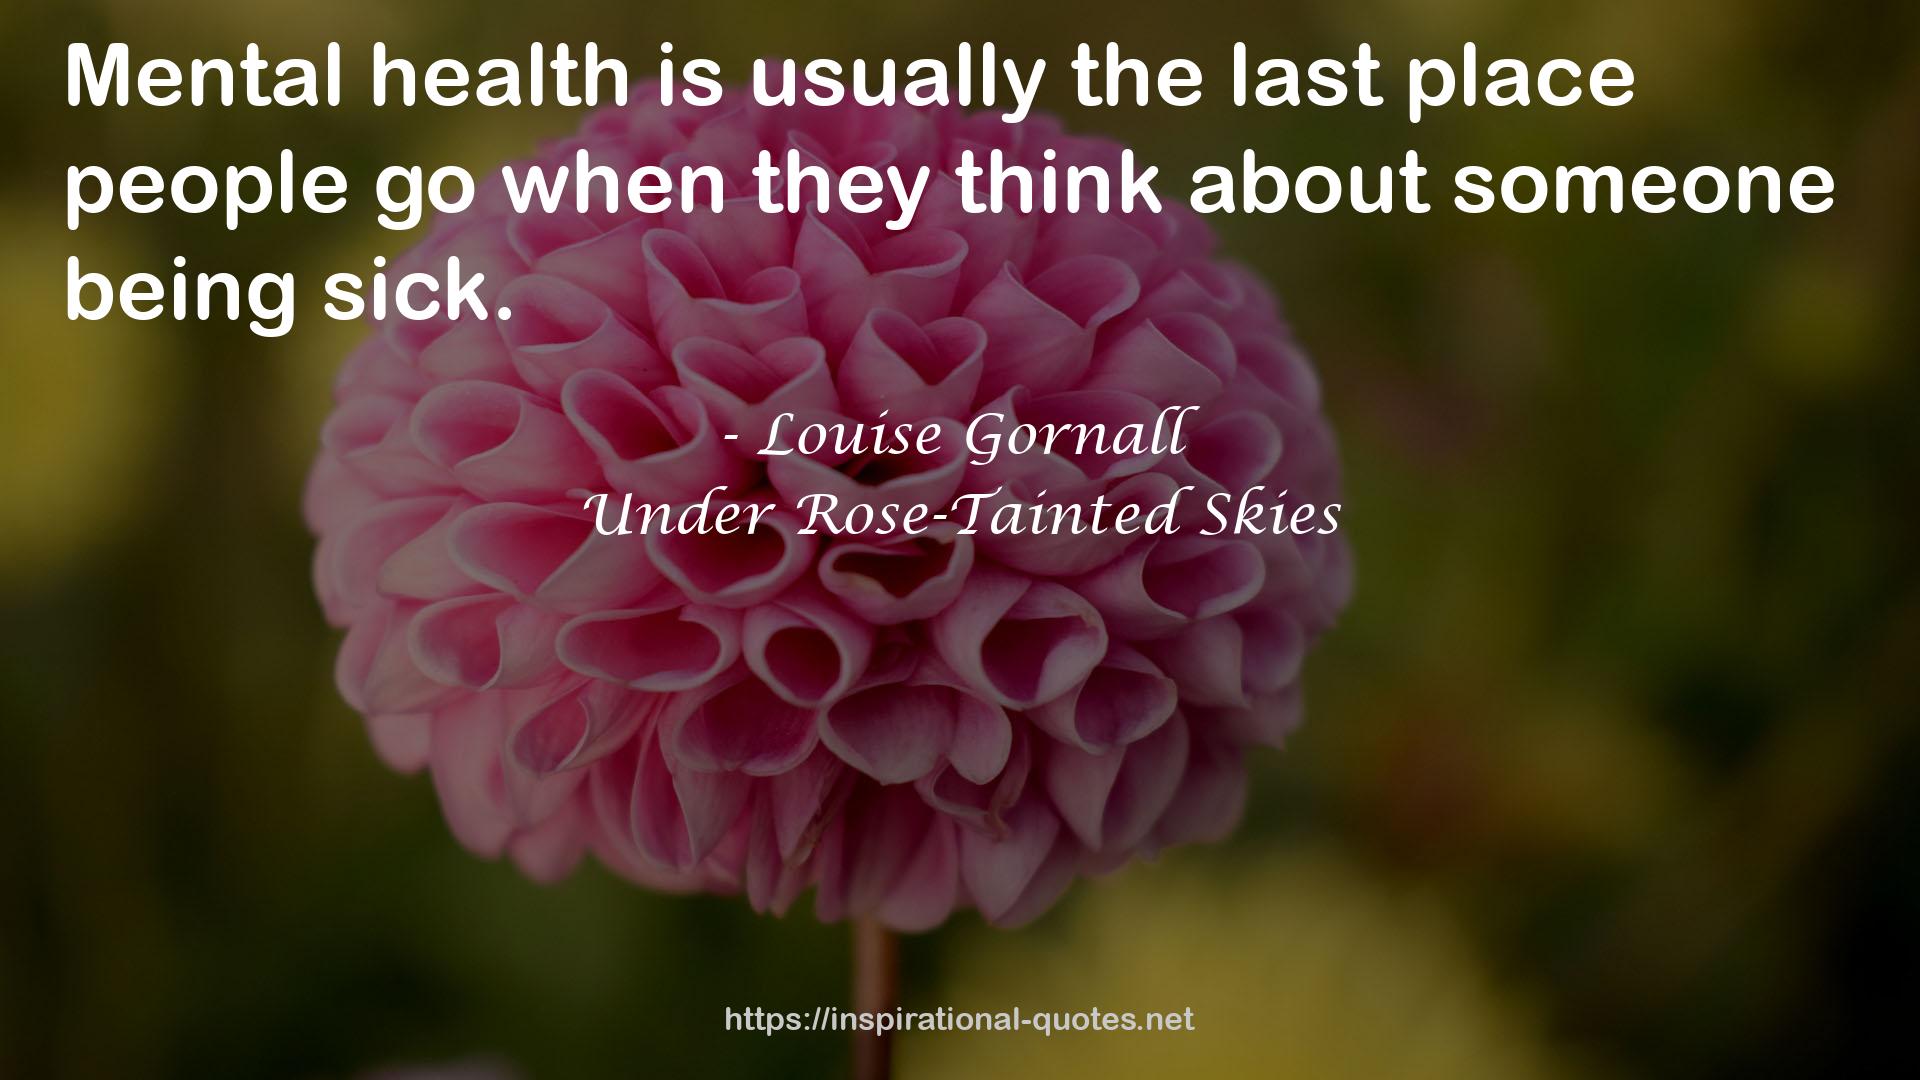 Louise Gornall QUOTES